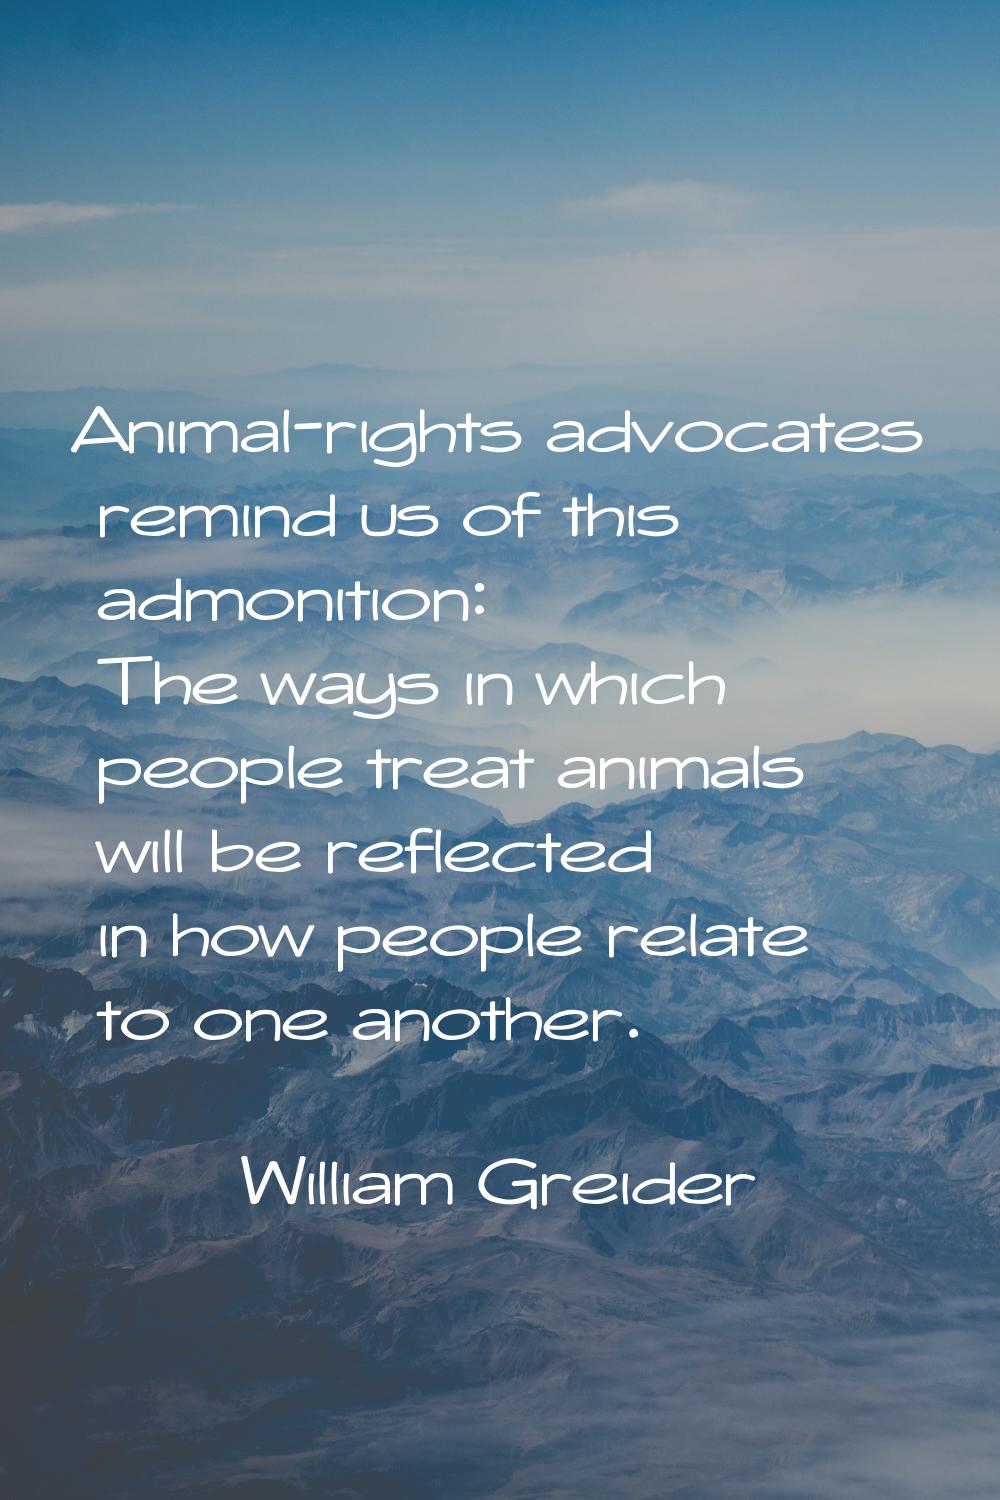 Animal-rights advocates remind us of this admonition: The ways in which people treat animals will b